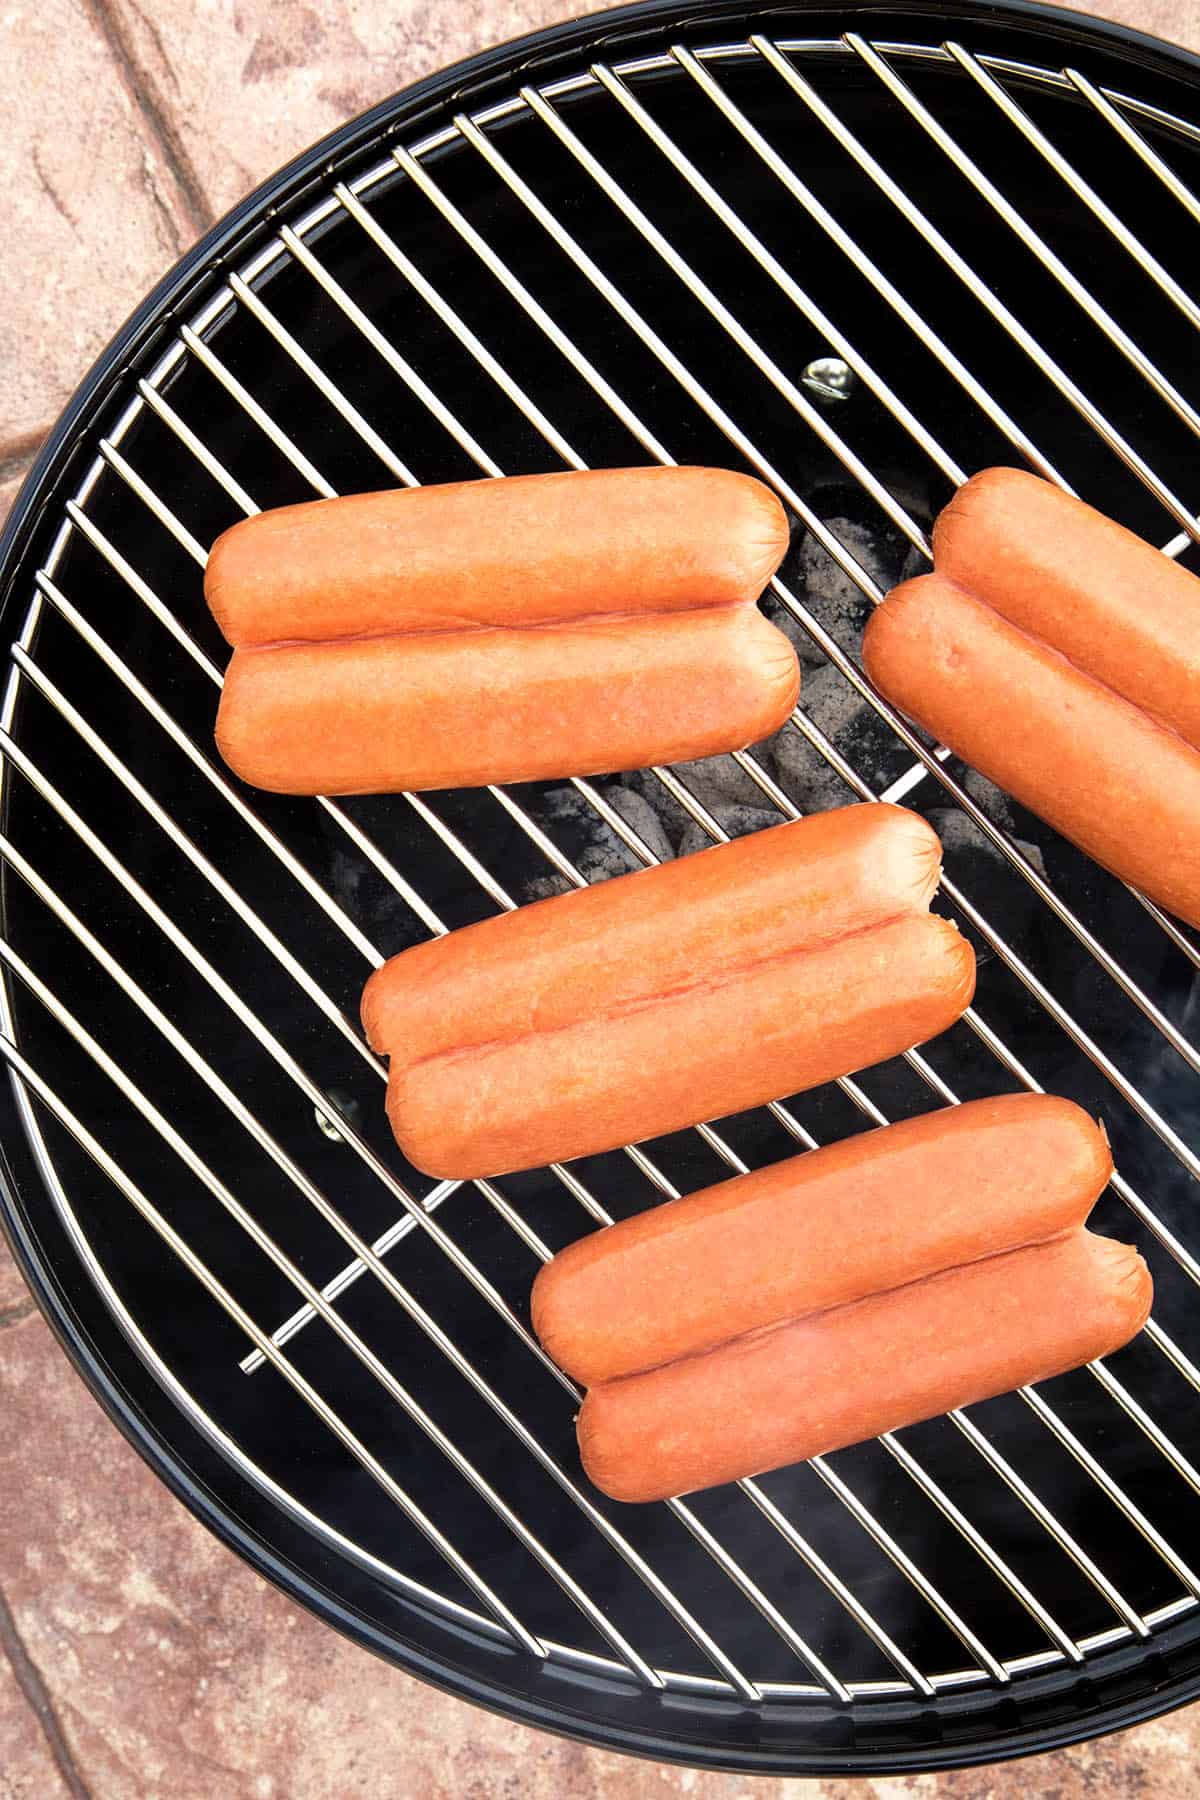 Split hot dogs on the grill